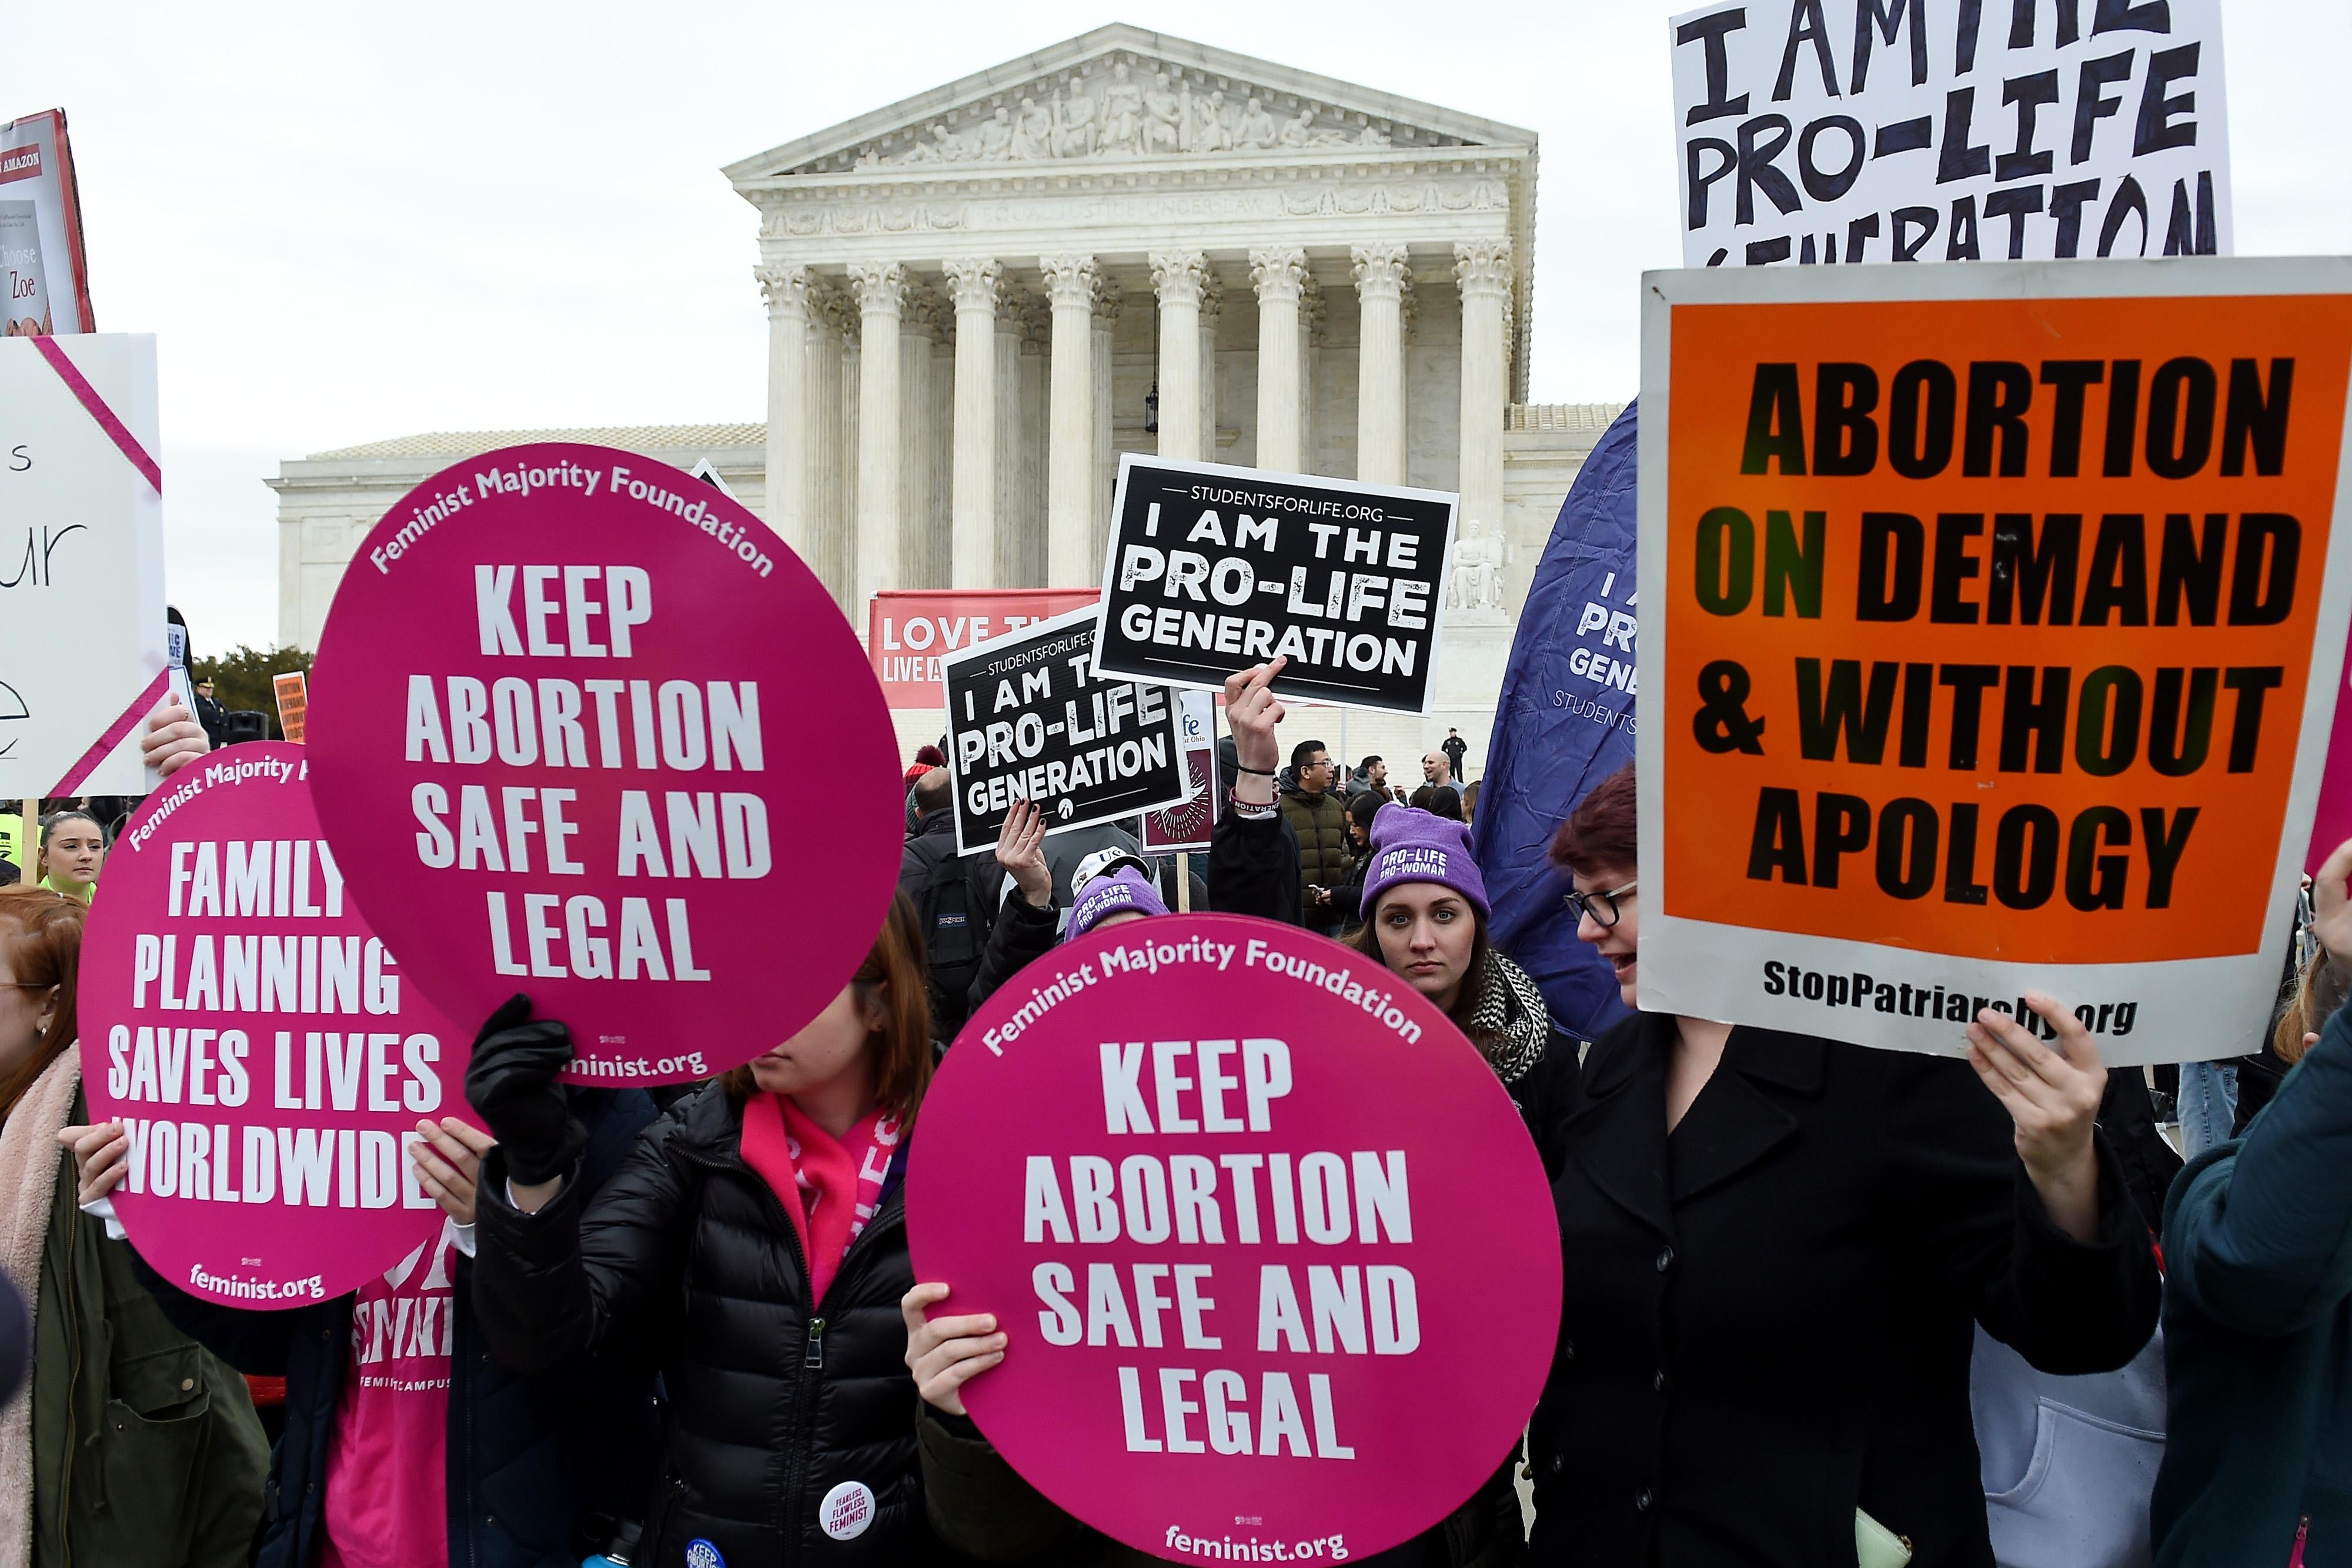 A crowd of protesters holding signs for and against abortion outside the Supreme Court